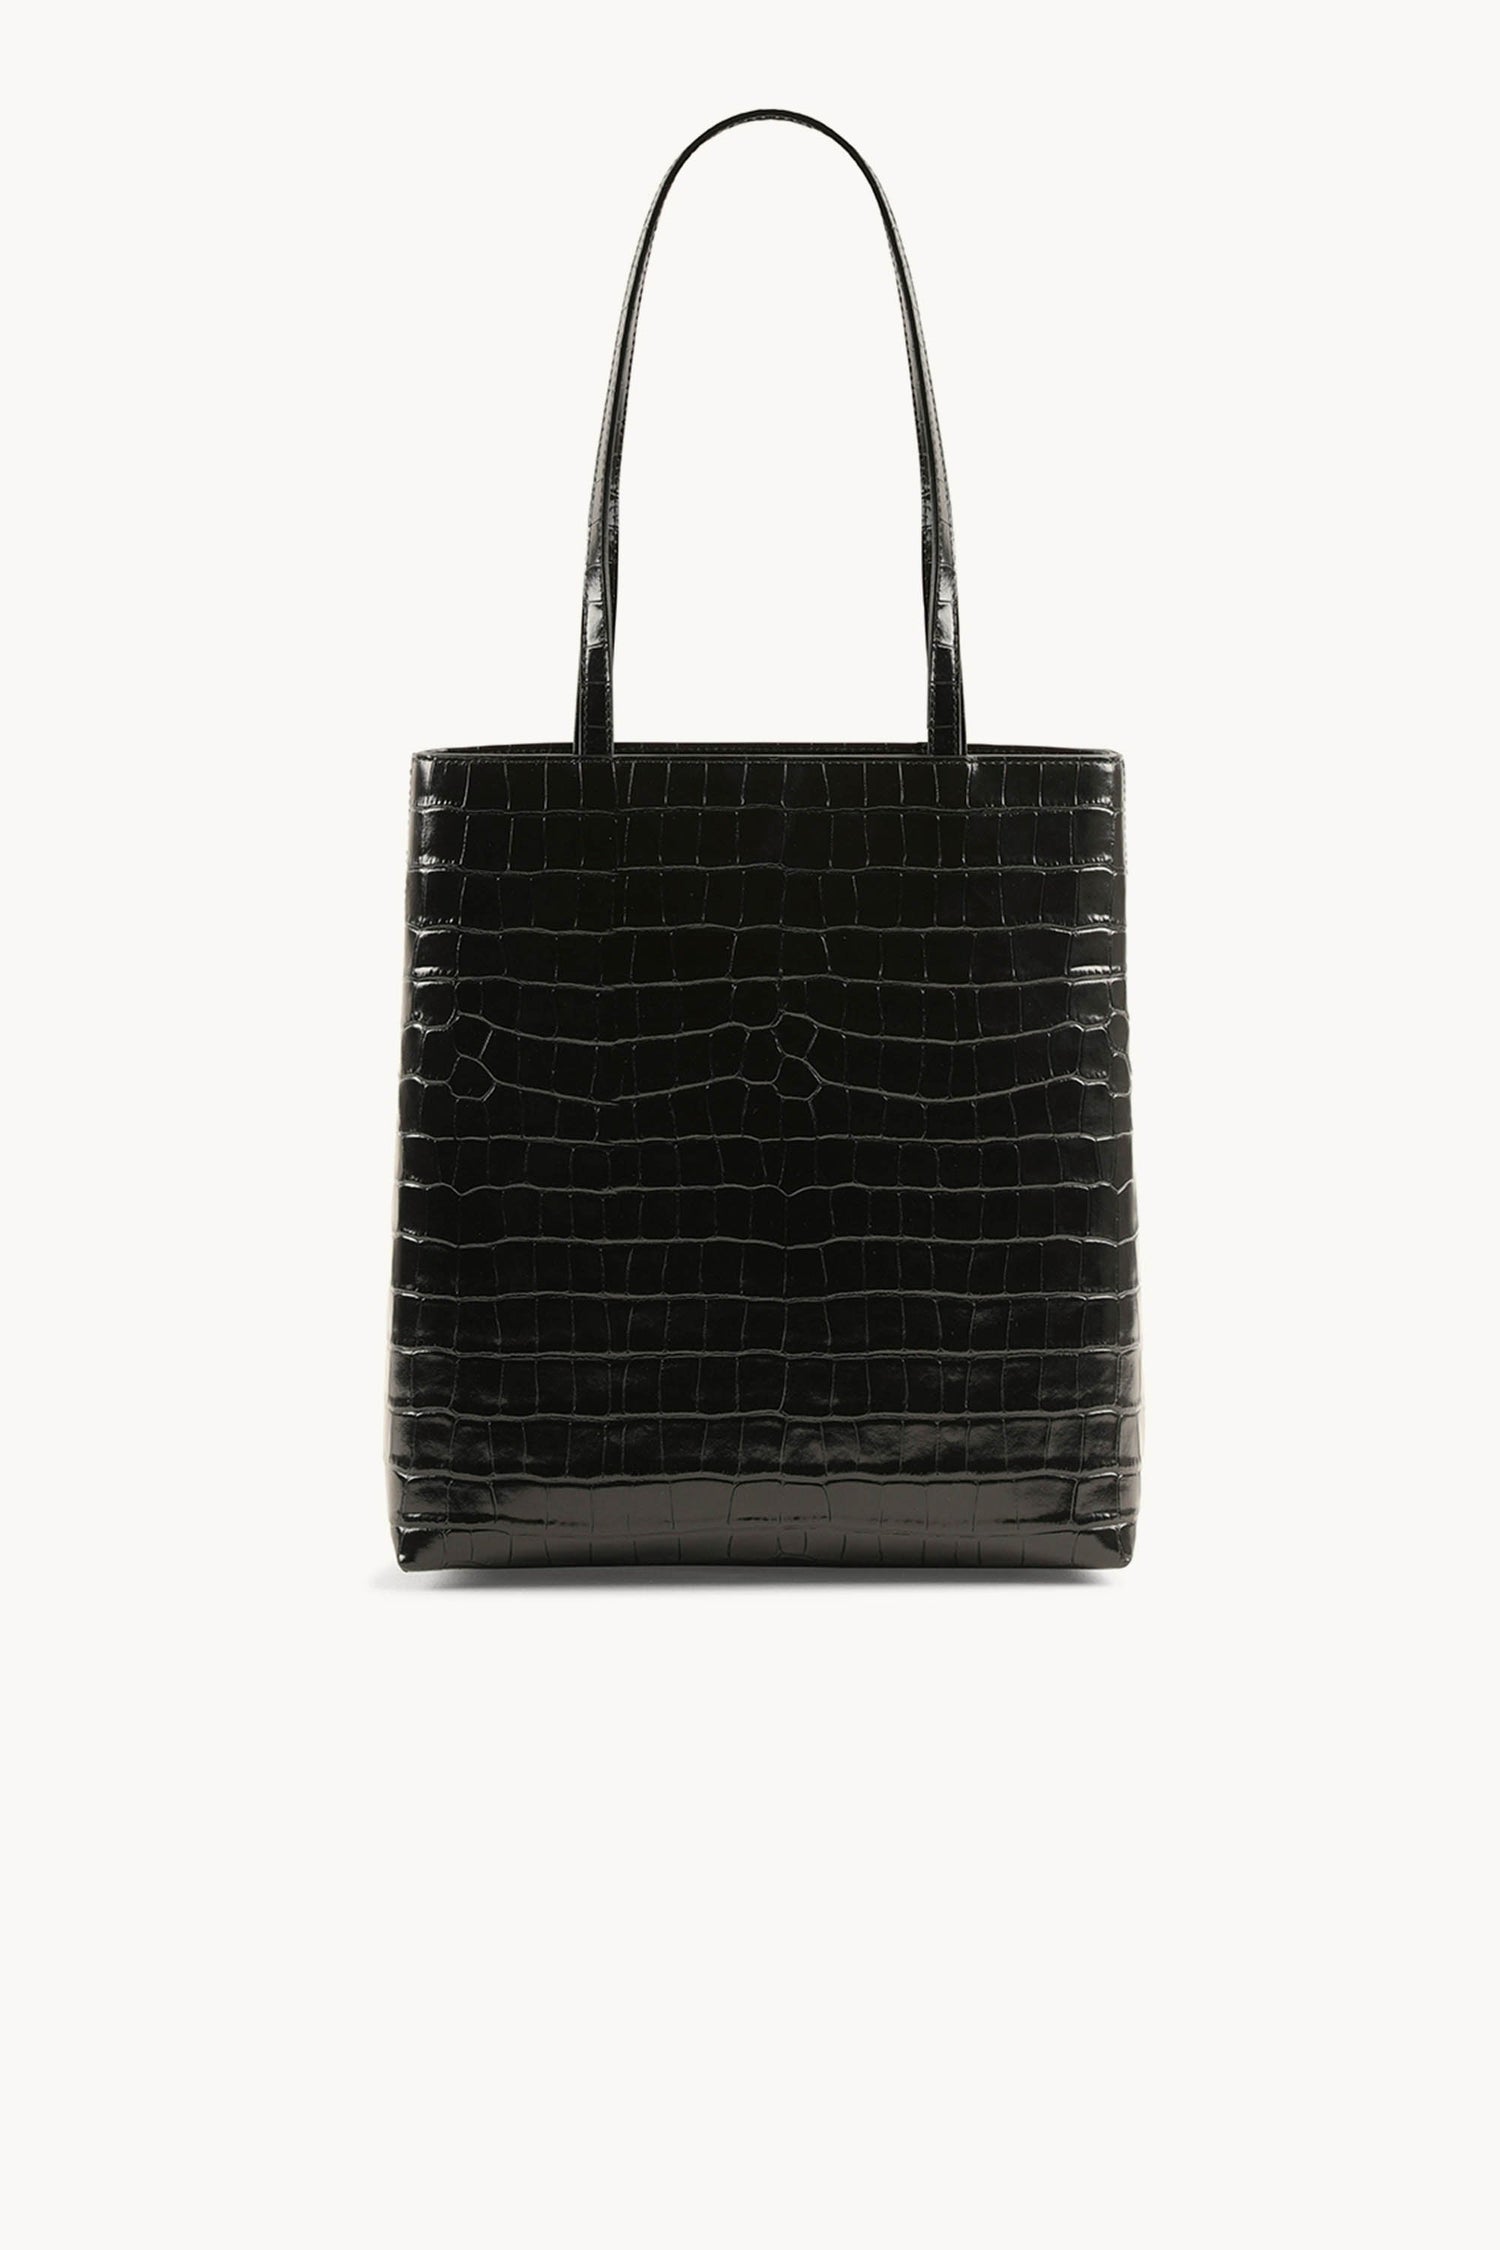 The Madeline Croc-effect Tote Silver Leather Tote Dylan Kain 